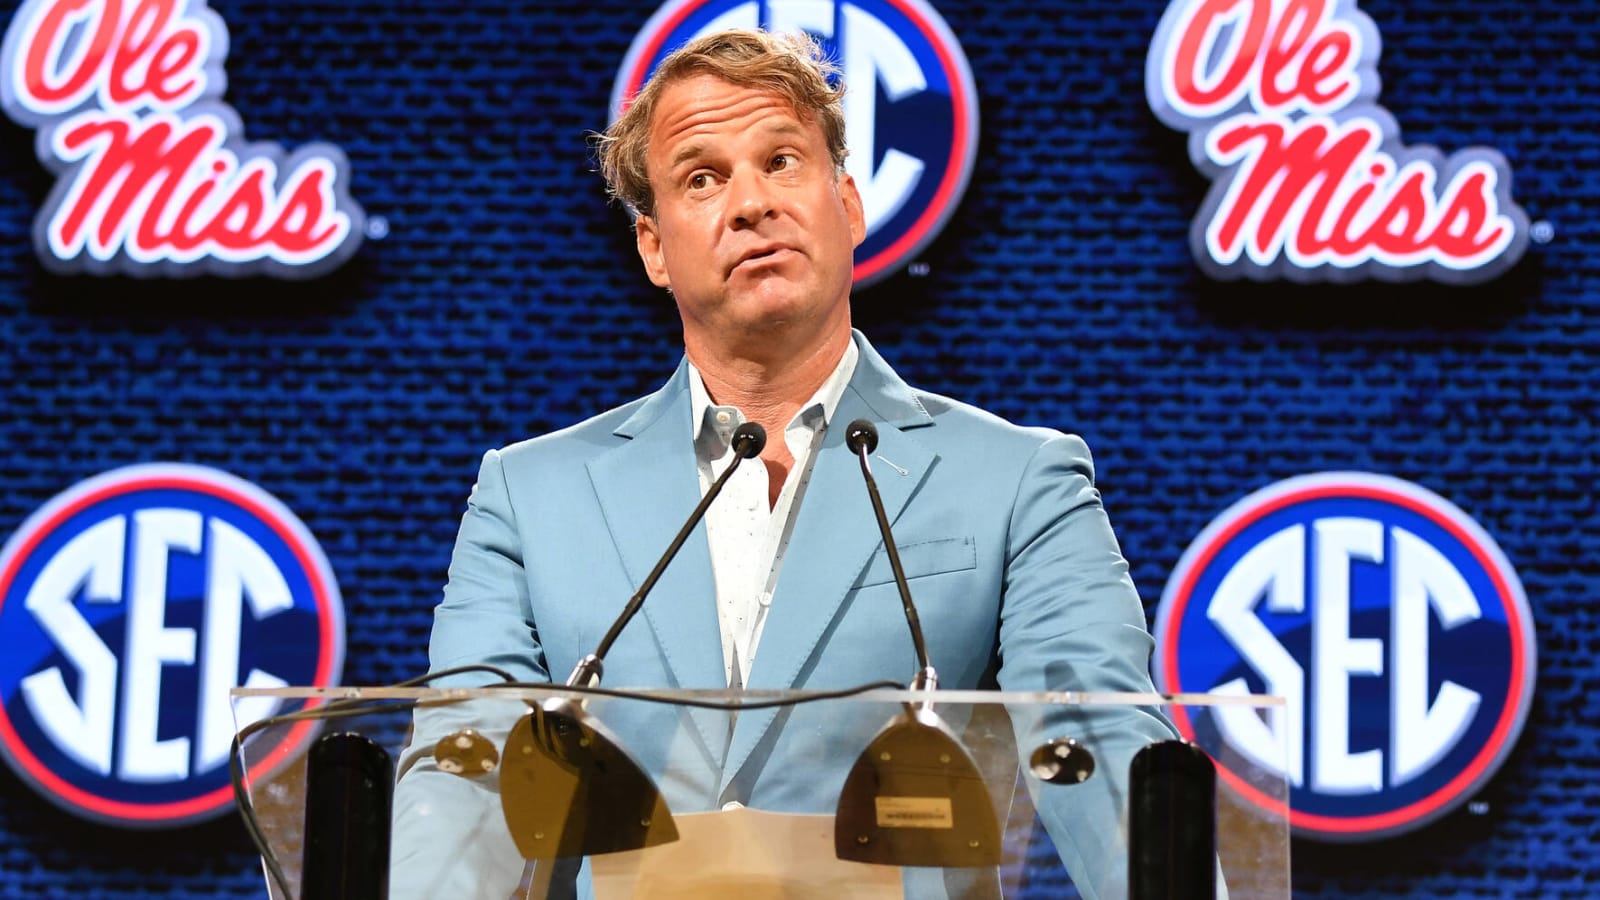 Ole Miss HC Lane Kiffin reacts to Jerry Jones’ odd comment after Cowboys player’s arrest